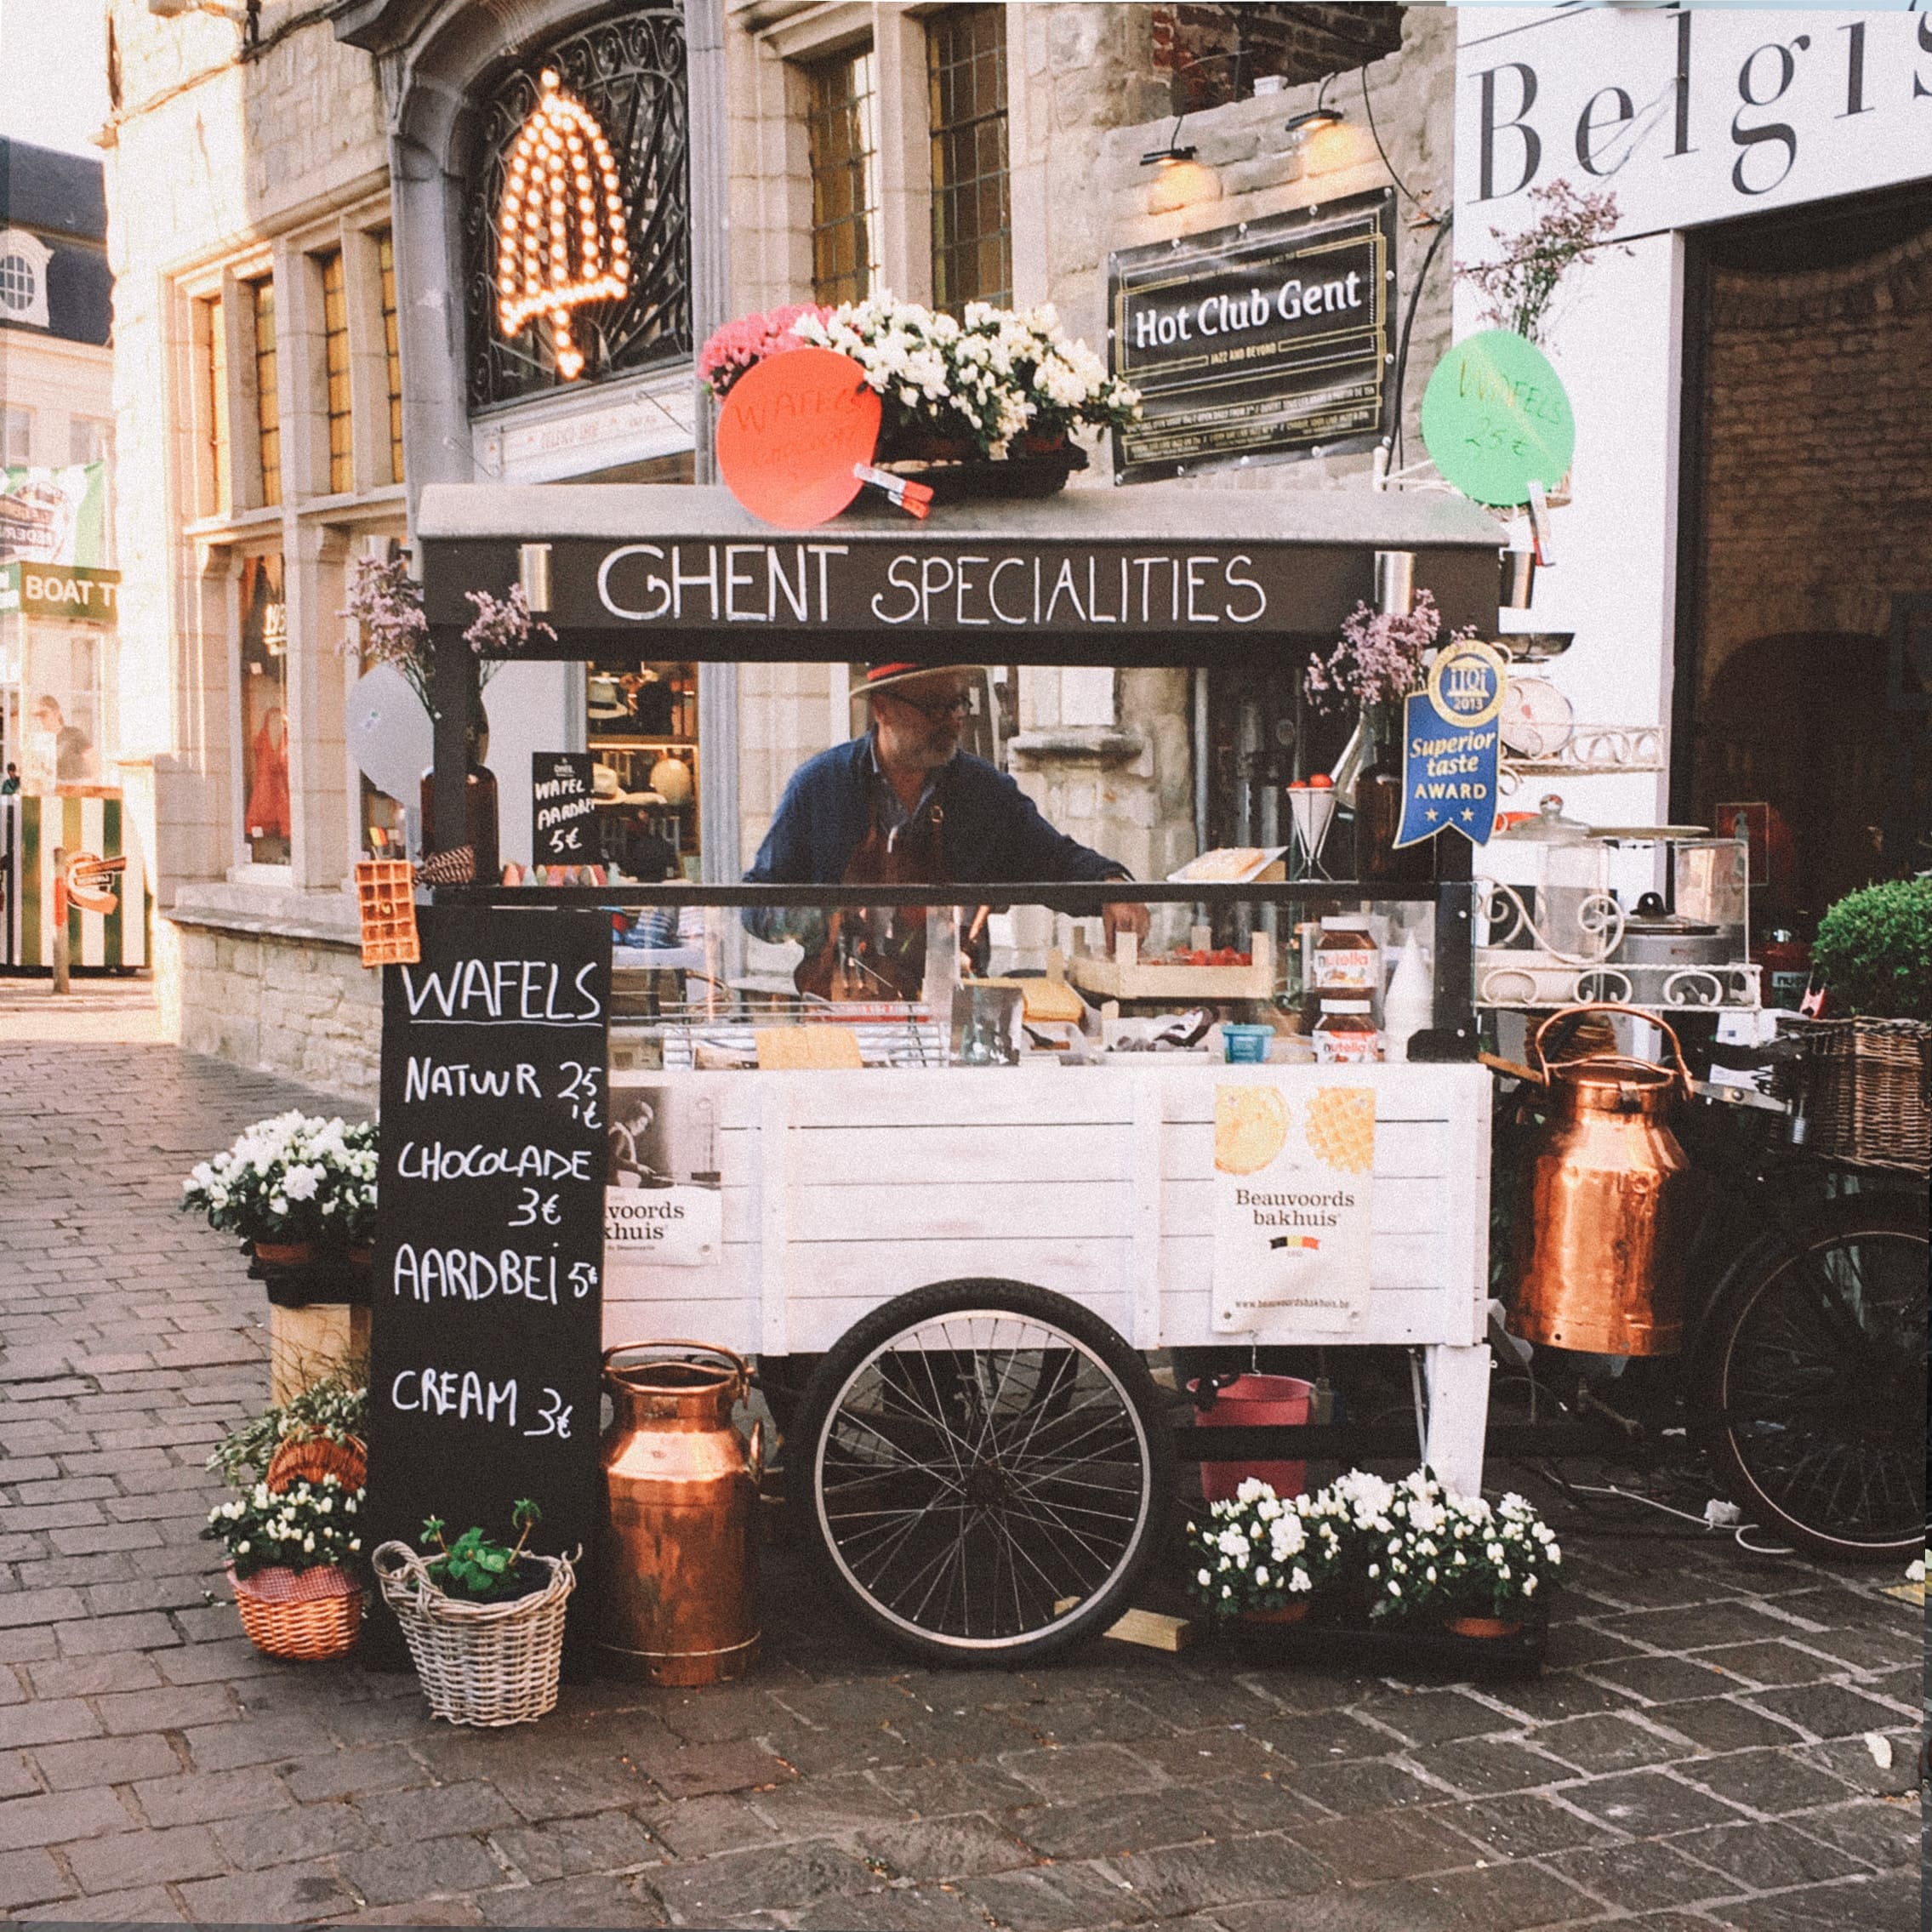 Vendor in the street in Ghent